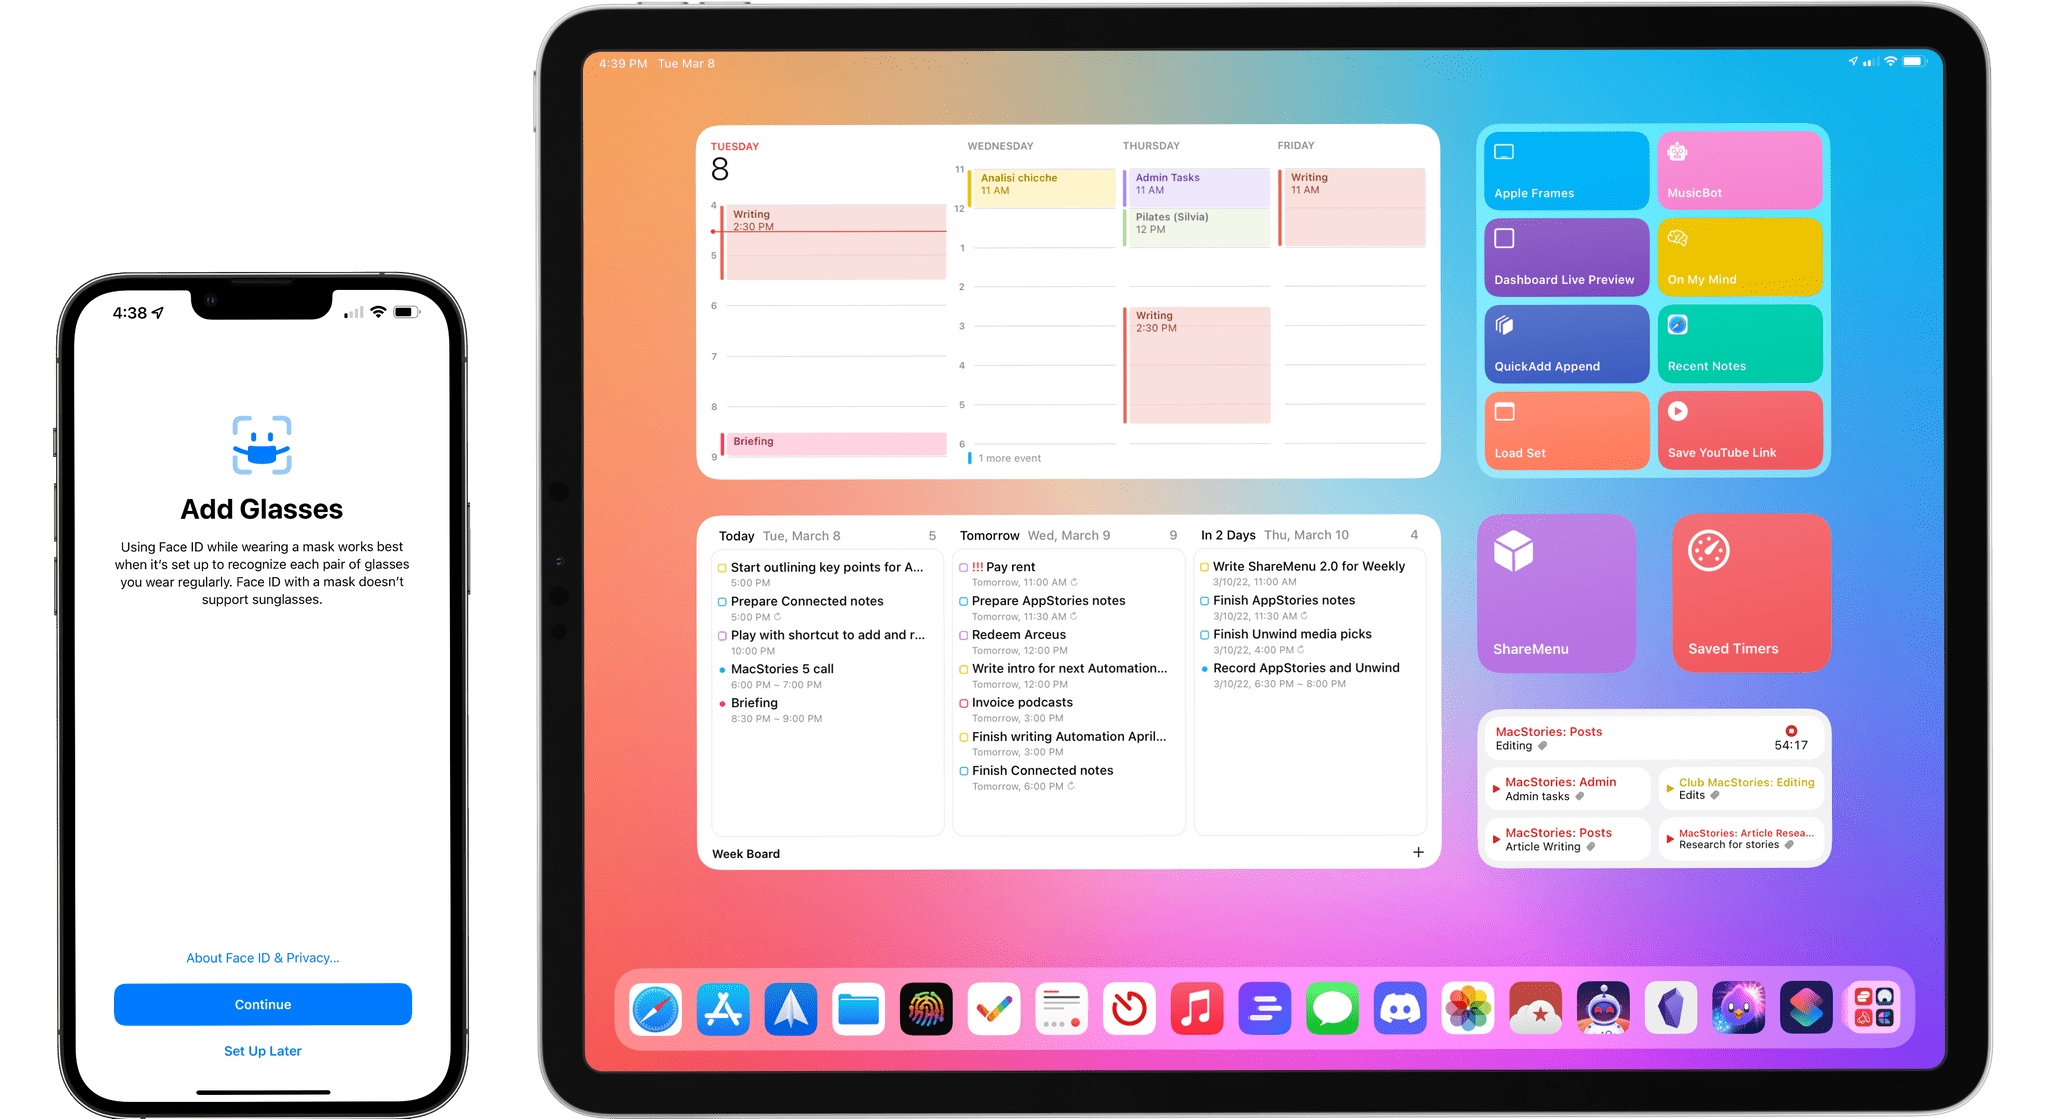 iOS and iPadOS 15.4 are available today.